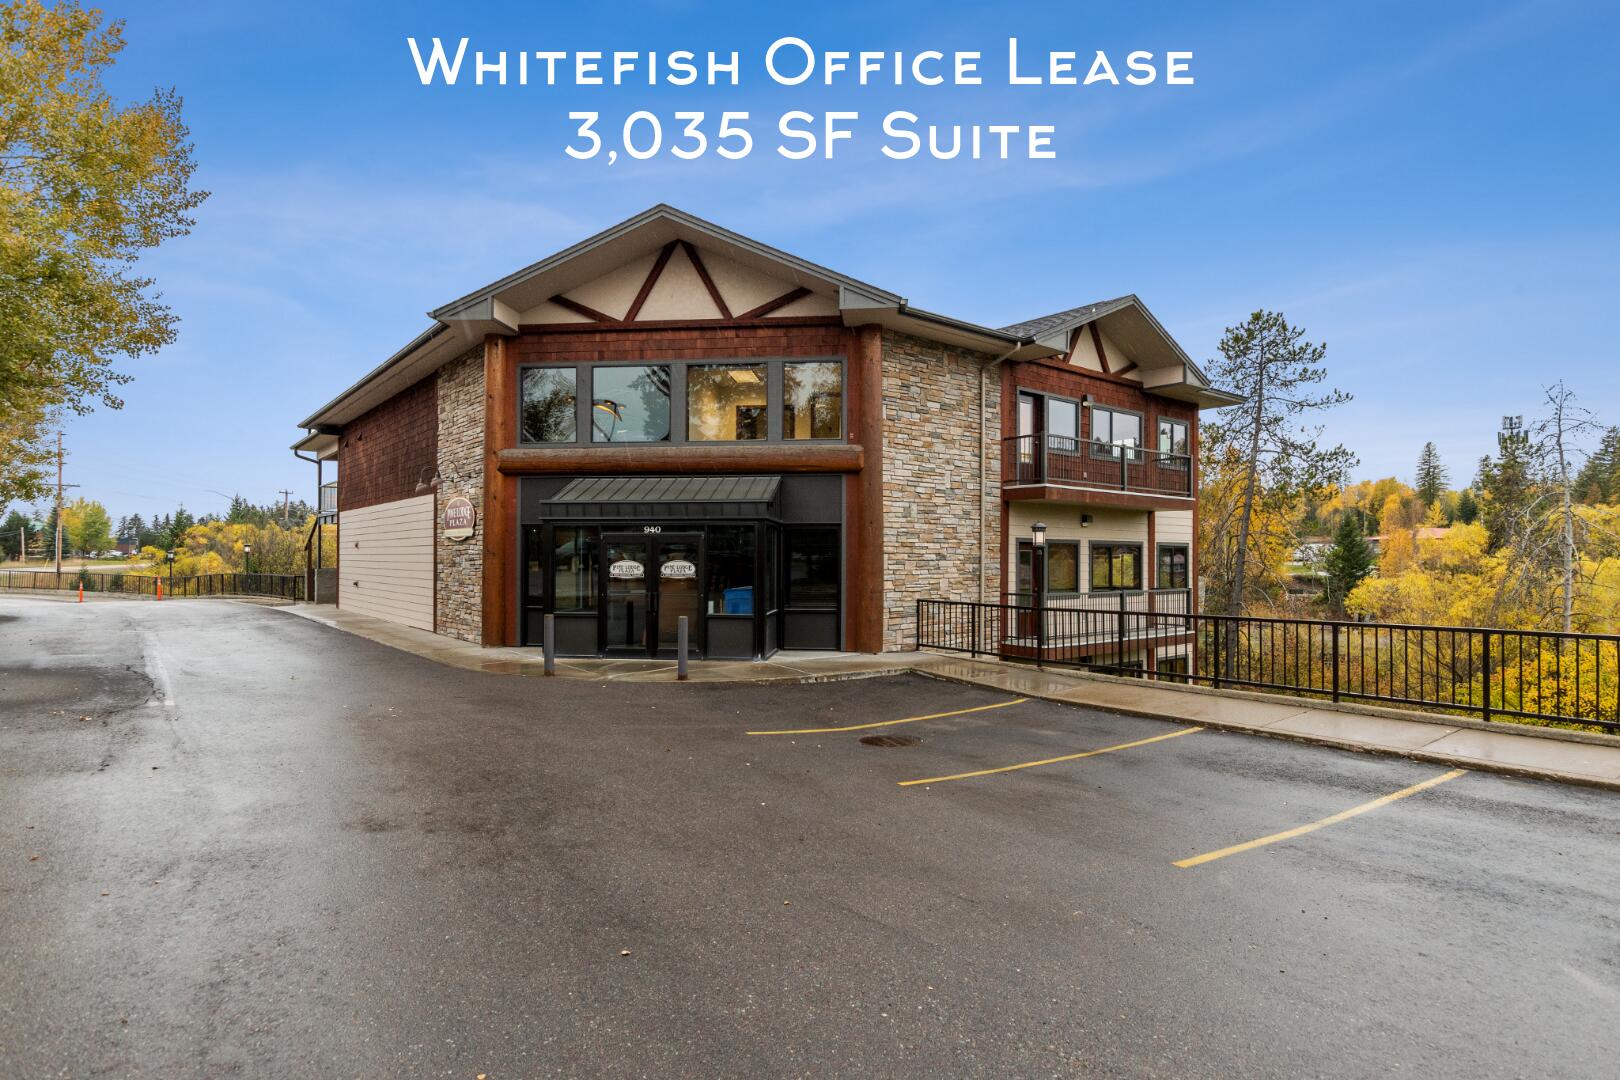 Rare Class A Medical-Office Space for LEASE  in Whitefish with a prime location.  4 private offices, large conference room, bullpen-flex space, Server Room and kitchen. 2 Restrooms on each floor and elevator served.  3 phase electric power with a 3 phase backup generator. Ideal for tech industry related business. Easily walk or bike along the Whitefish River Trail that leads directly to the downtown hub of restaurants, pubs, and shopping just .6 mile away. Kayak from the property during your break or just to wind down during the Winter with skiing 15 minutes away from door to chair.  Come take a look at this rare opportunity for professional office space. Call Bret Richmond at 406.210.0230 or Cory Richmond at 406.249.2537 or your real estate professional